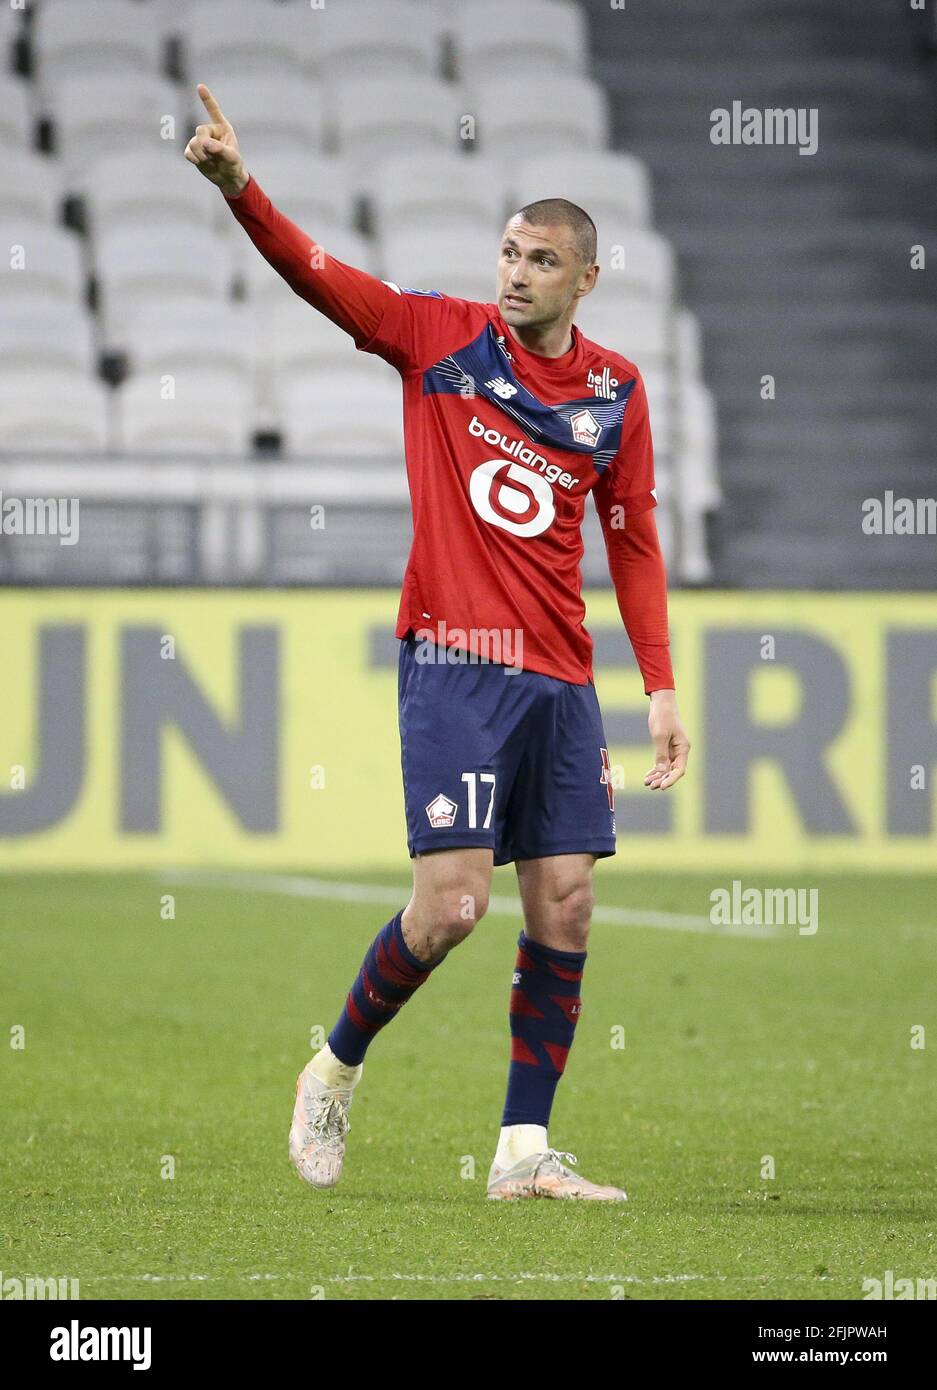 Burak Yilmaz of Lille celebrates his winning goal during the French  championship Ligue 1 football match between Olympique Lyonnais (OL) and  Lille OSC (LOSC) on April 25, 2021 at Groupama Stadium in